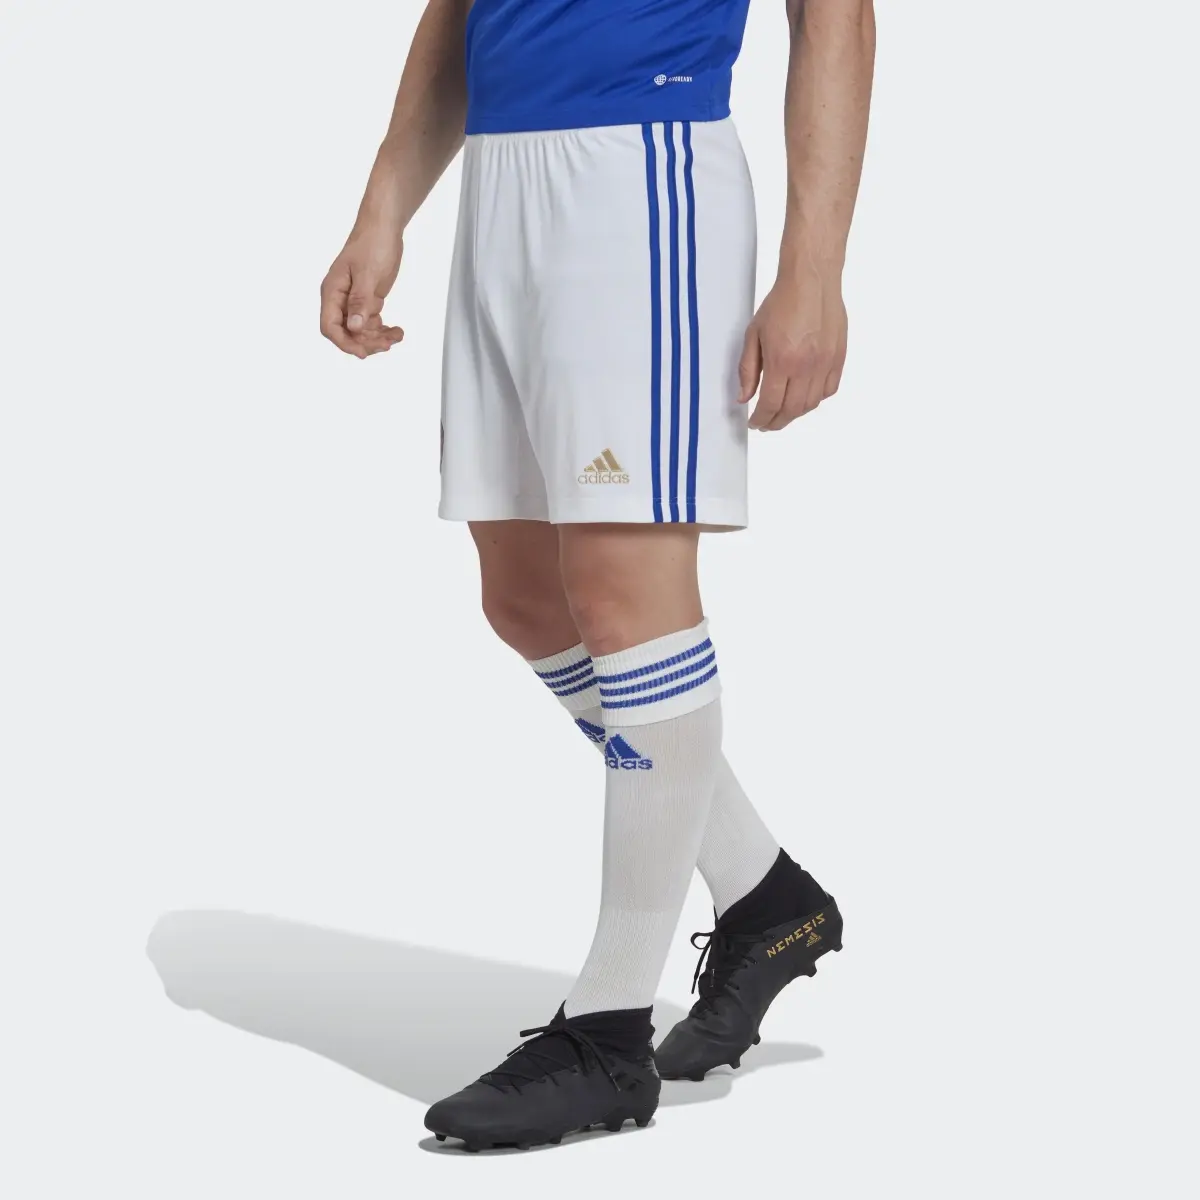 Adidas Leicester City FC 22/23 Home Shorts. 1